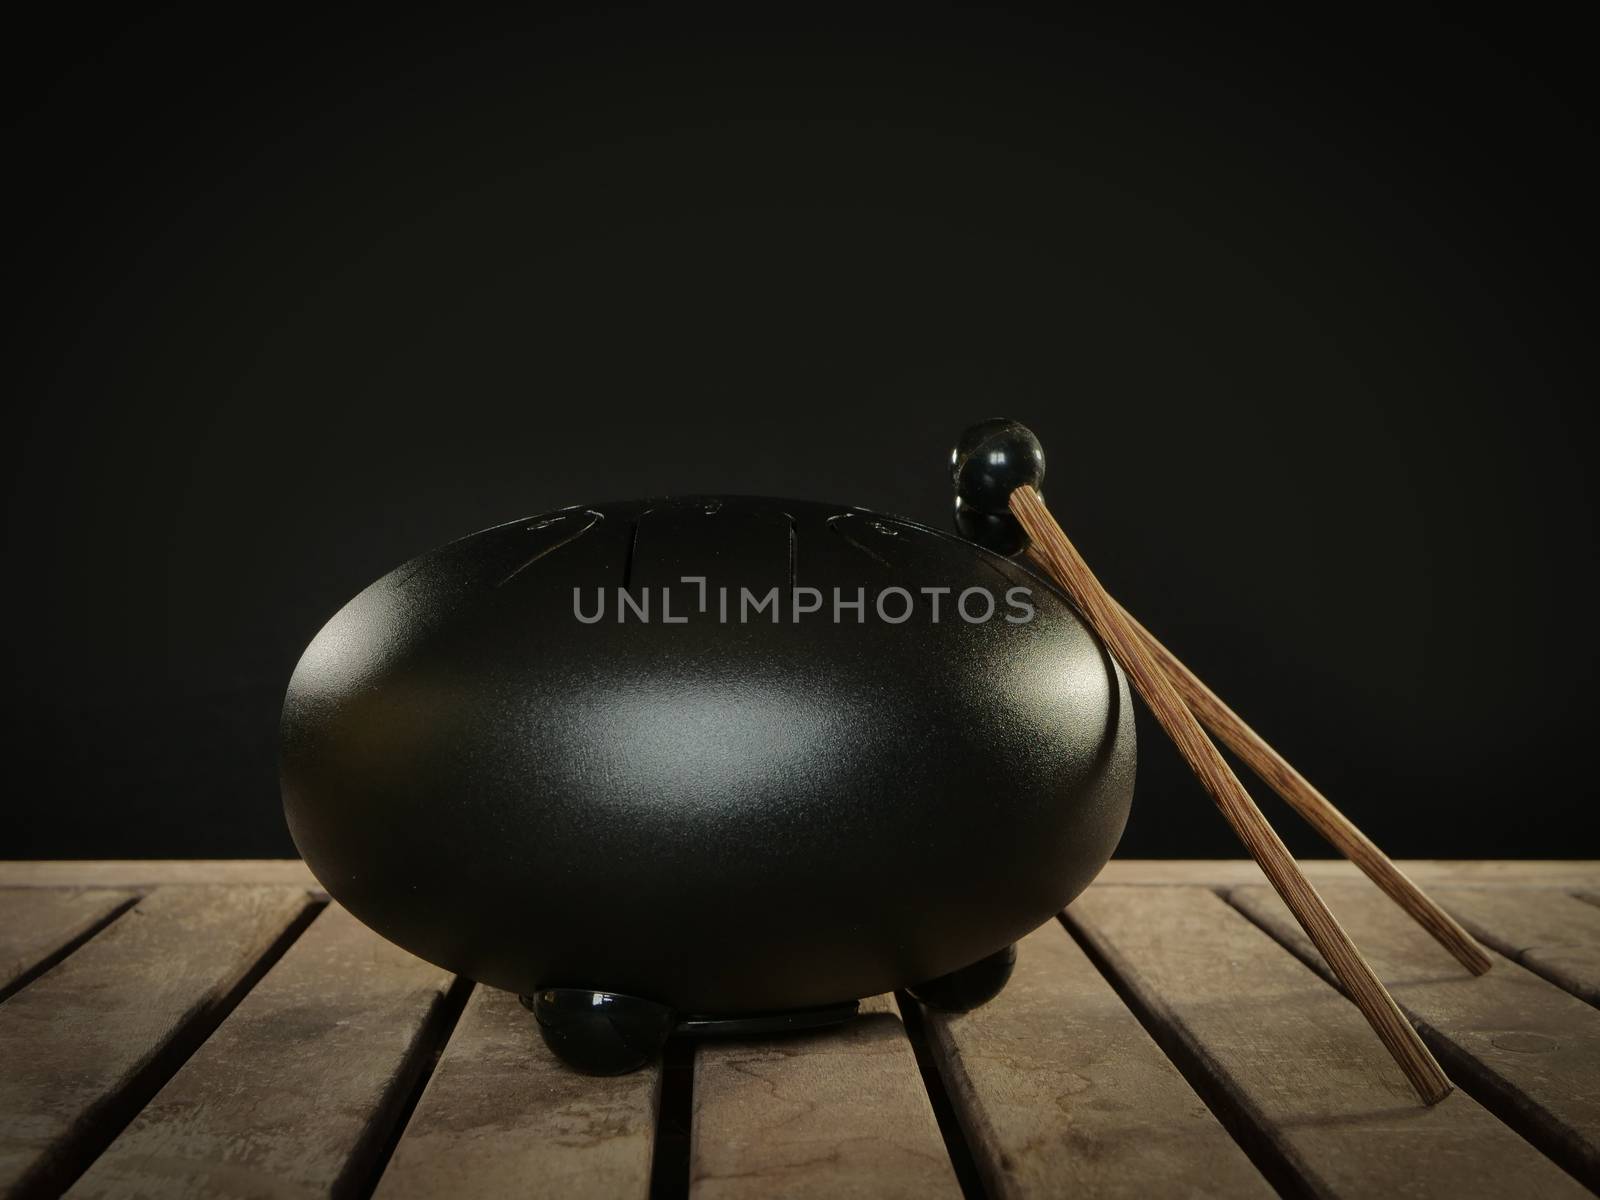 Steel tongue drum rare music playing instrument, made from propane tank and also known as tank drum or hank drum similar to Pantam.  On wooden surface and black background